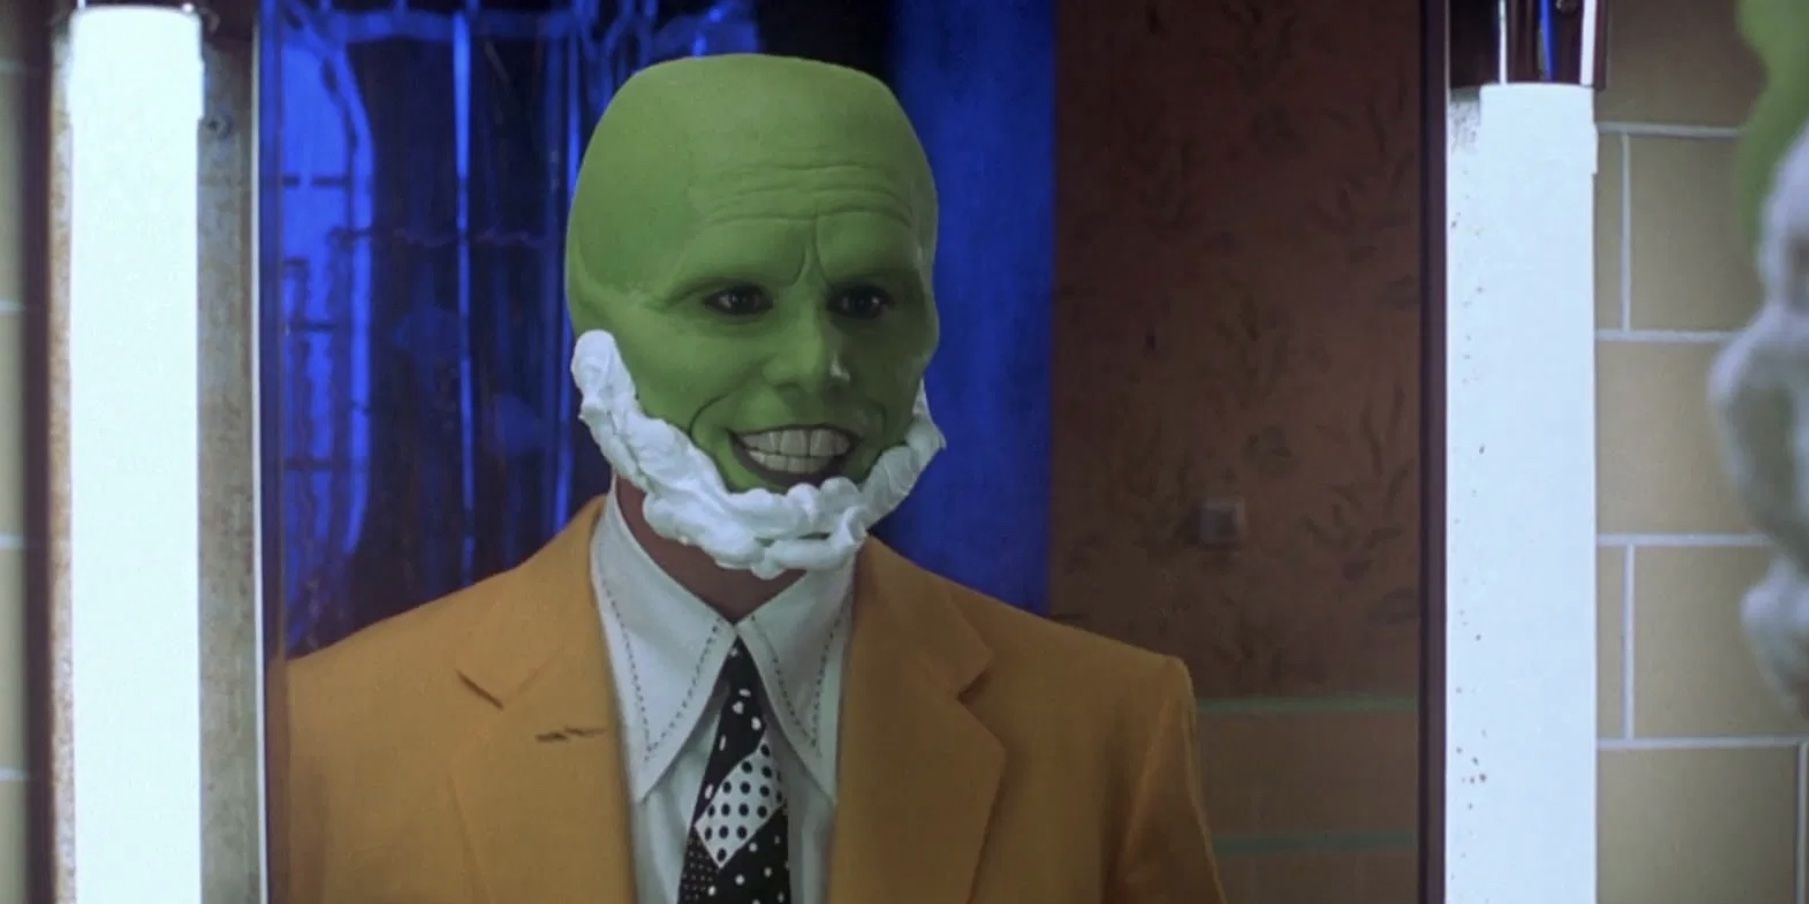 Man with a green mask standing in front of a mirror in 'The Mask'